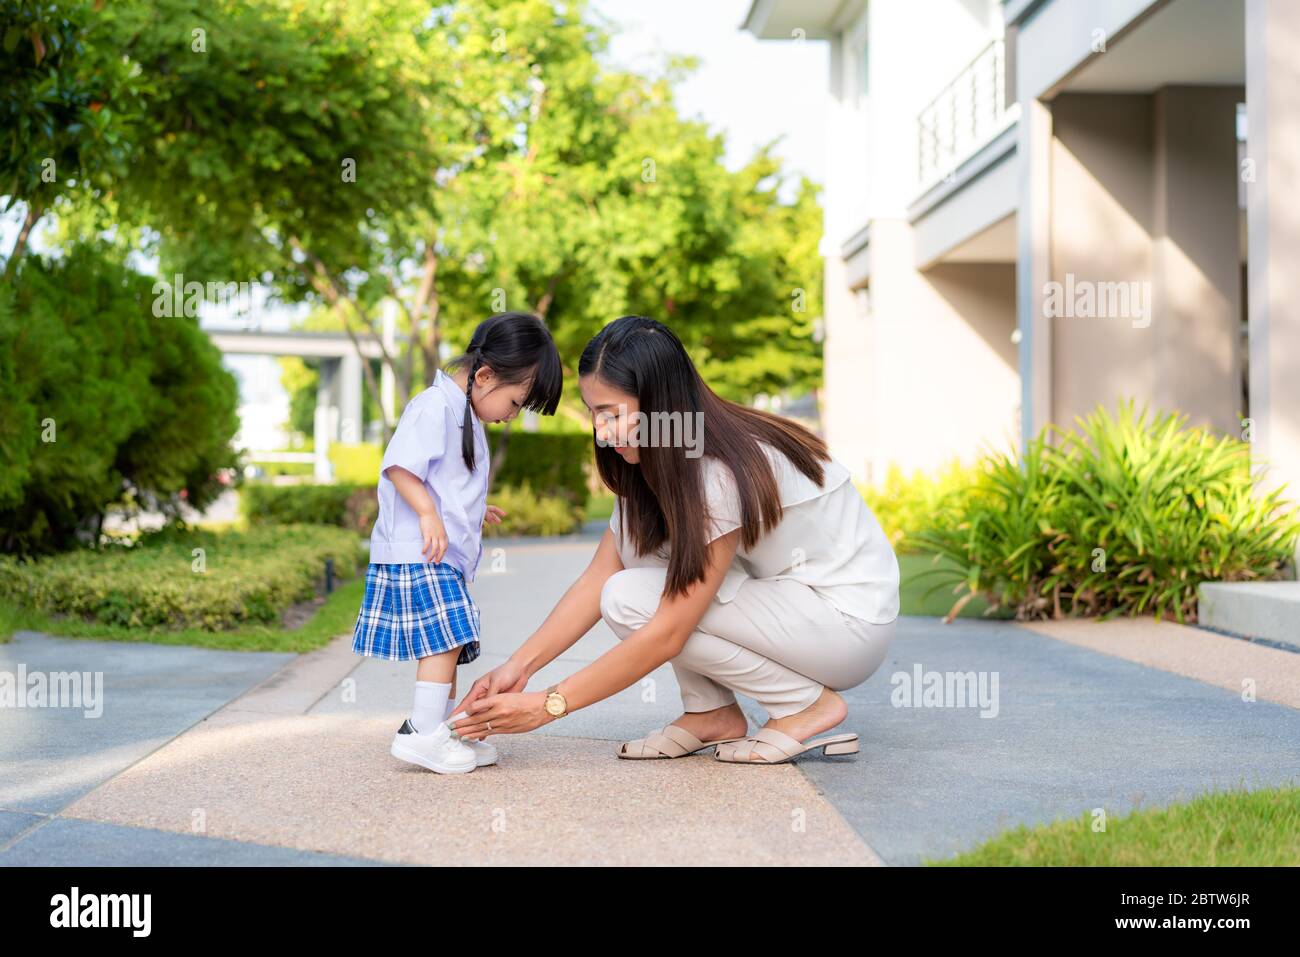 Asian mother helping her daughter put shoes on or take off at outdoor park getting ready to go out together or coming back home from school in happy f Stock Photo